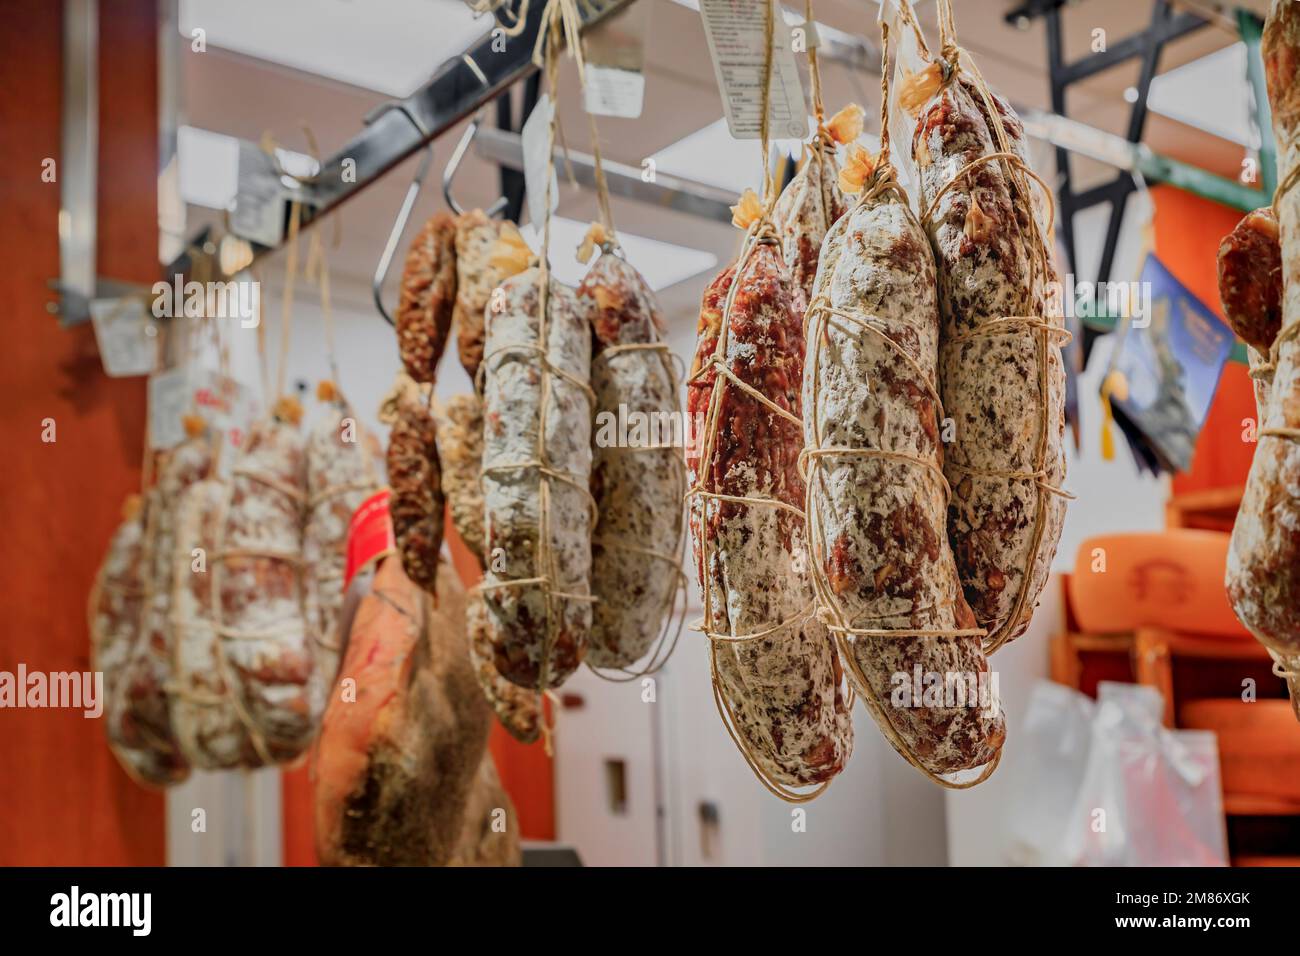 Salami sausage on display for sale hanging at a salumeria meat and cheese shop in Central Market Mercato Centrale in Florence, Italy Stock Photo